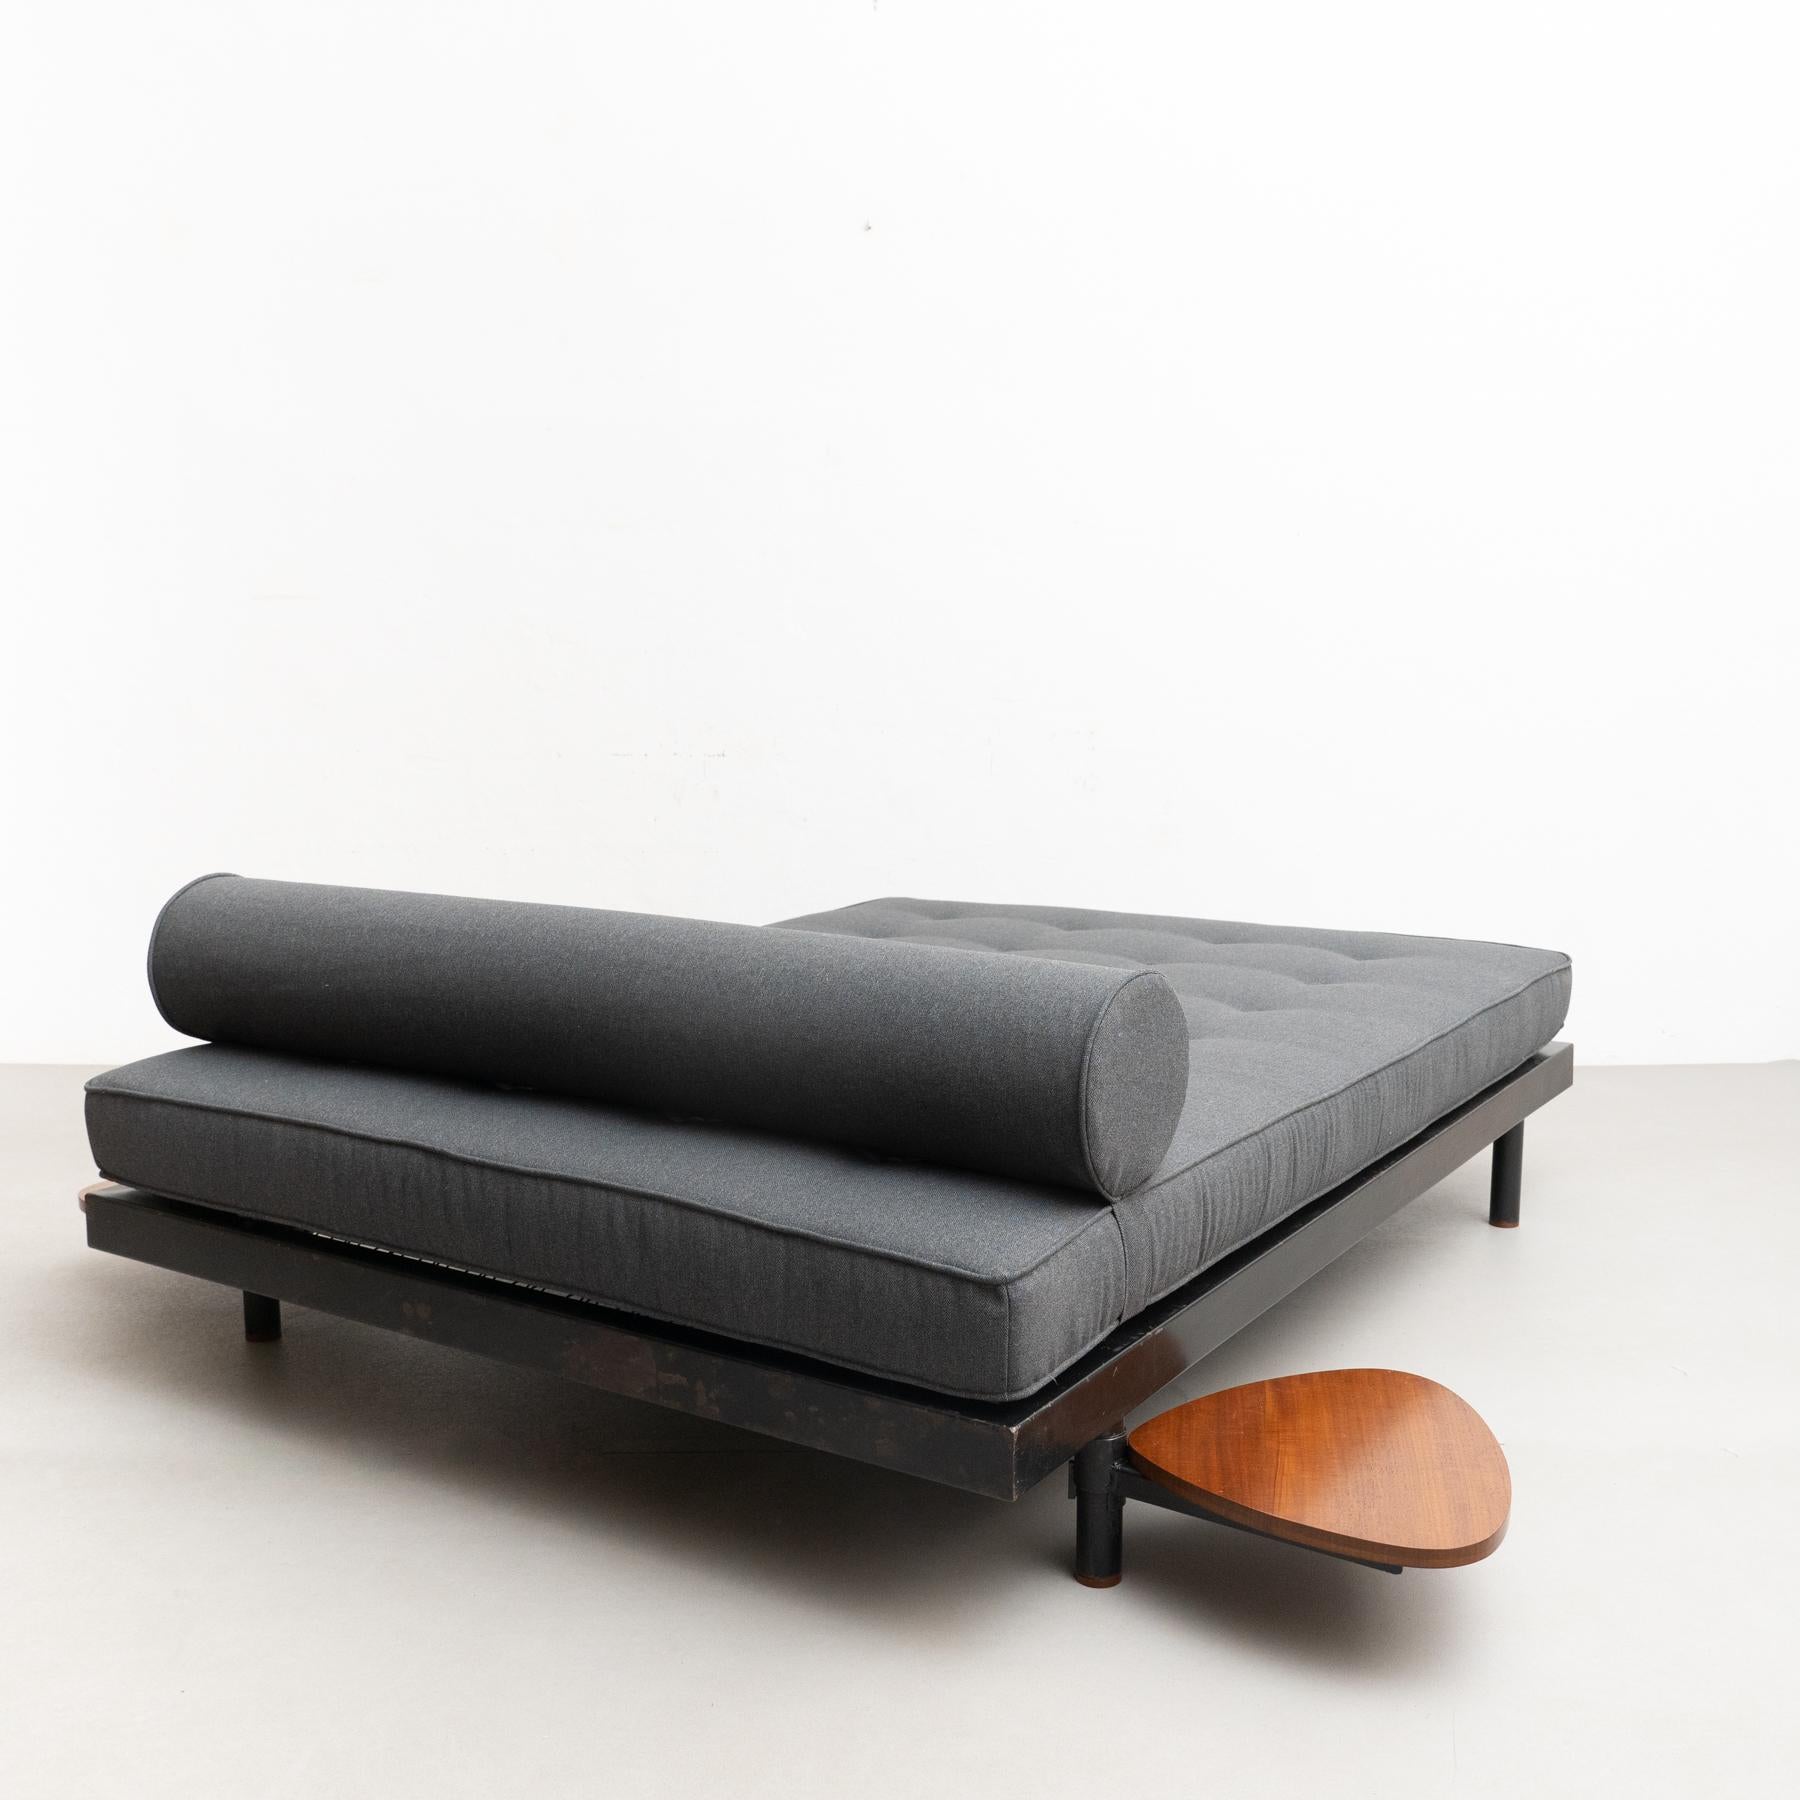 Metal S.C.A.L. Double Daybed by Jean Prouvé, circa 1950